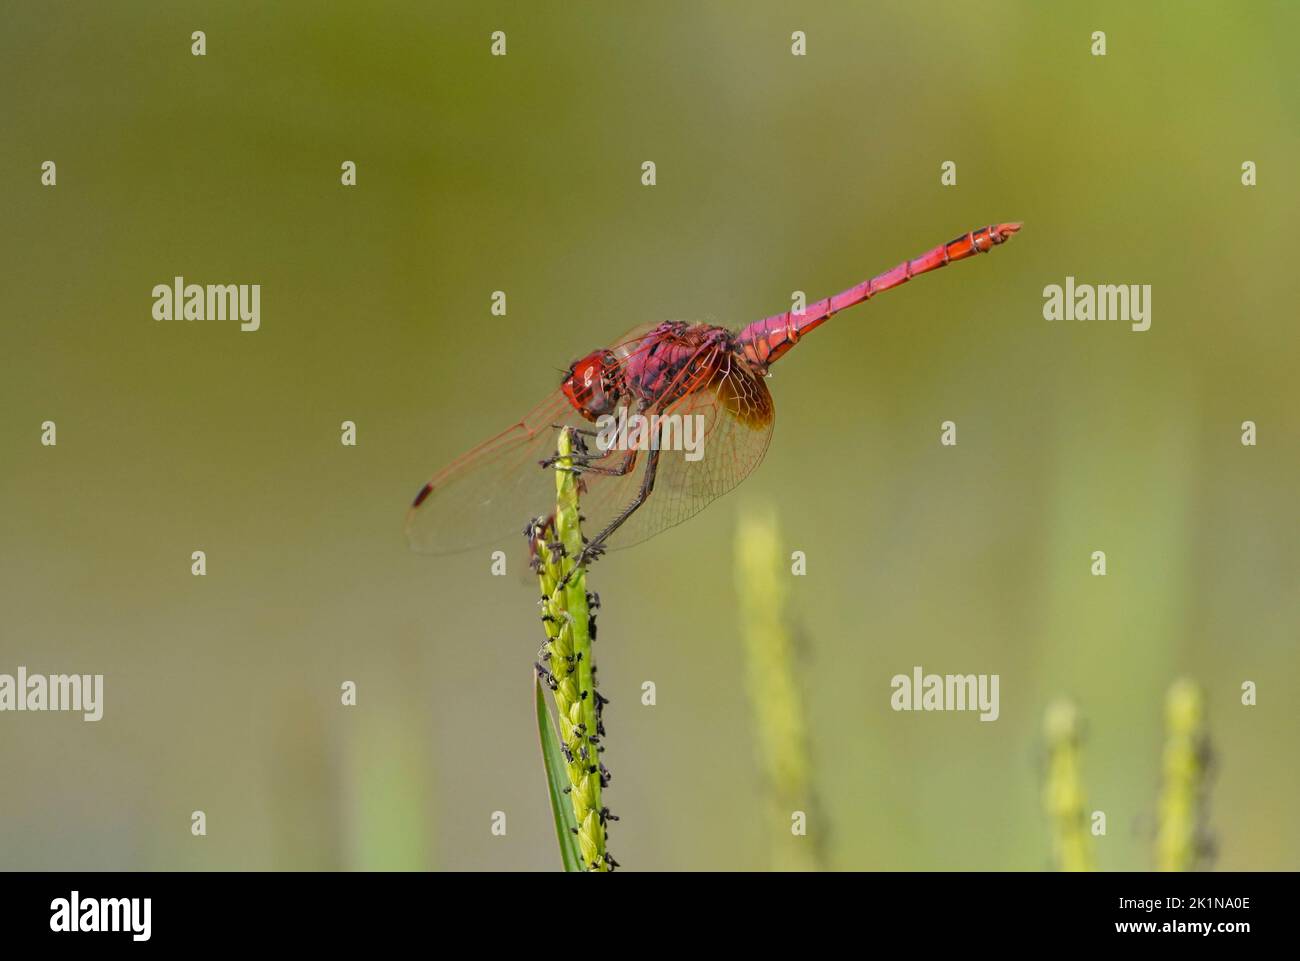 Violet dropwing (Trithemis annulata), Male, dragonfly resting, near water pond. Andalusia, spain. Stock Photo